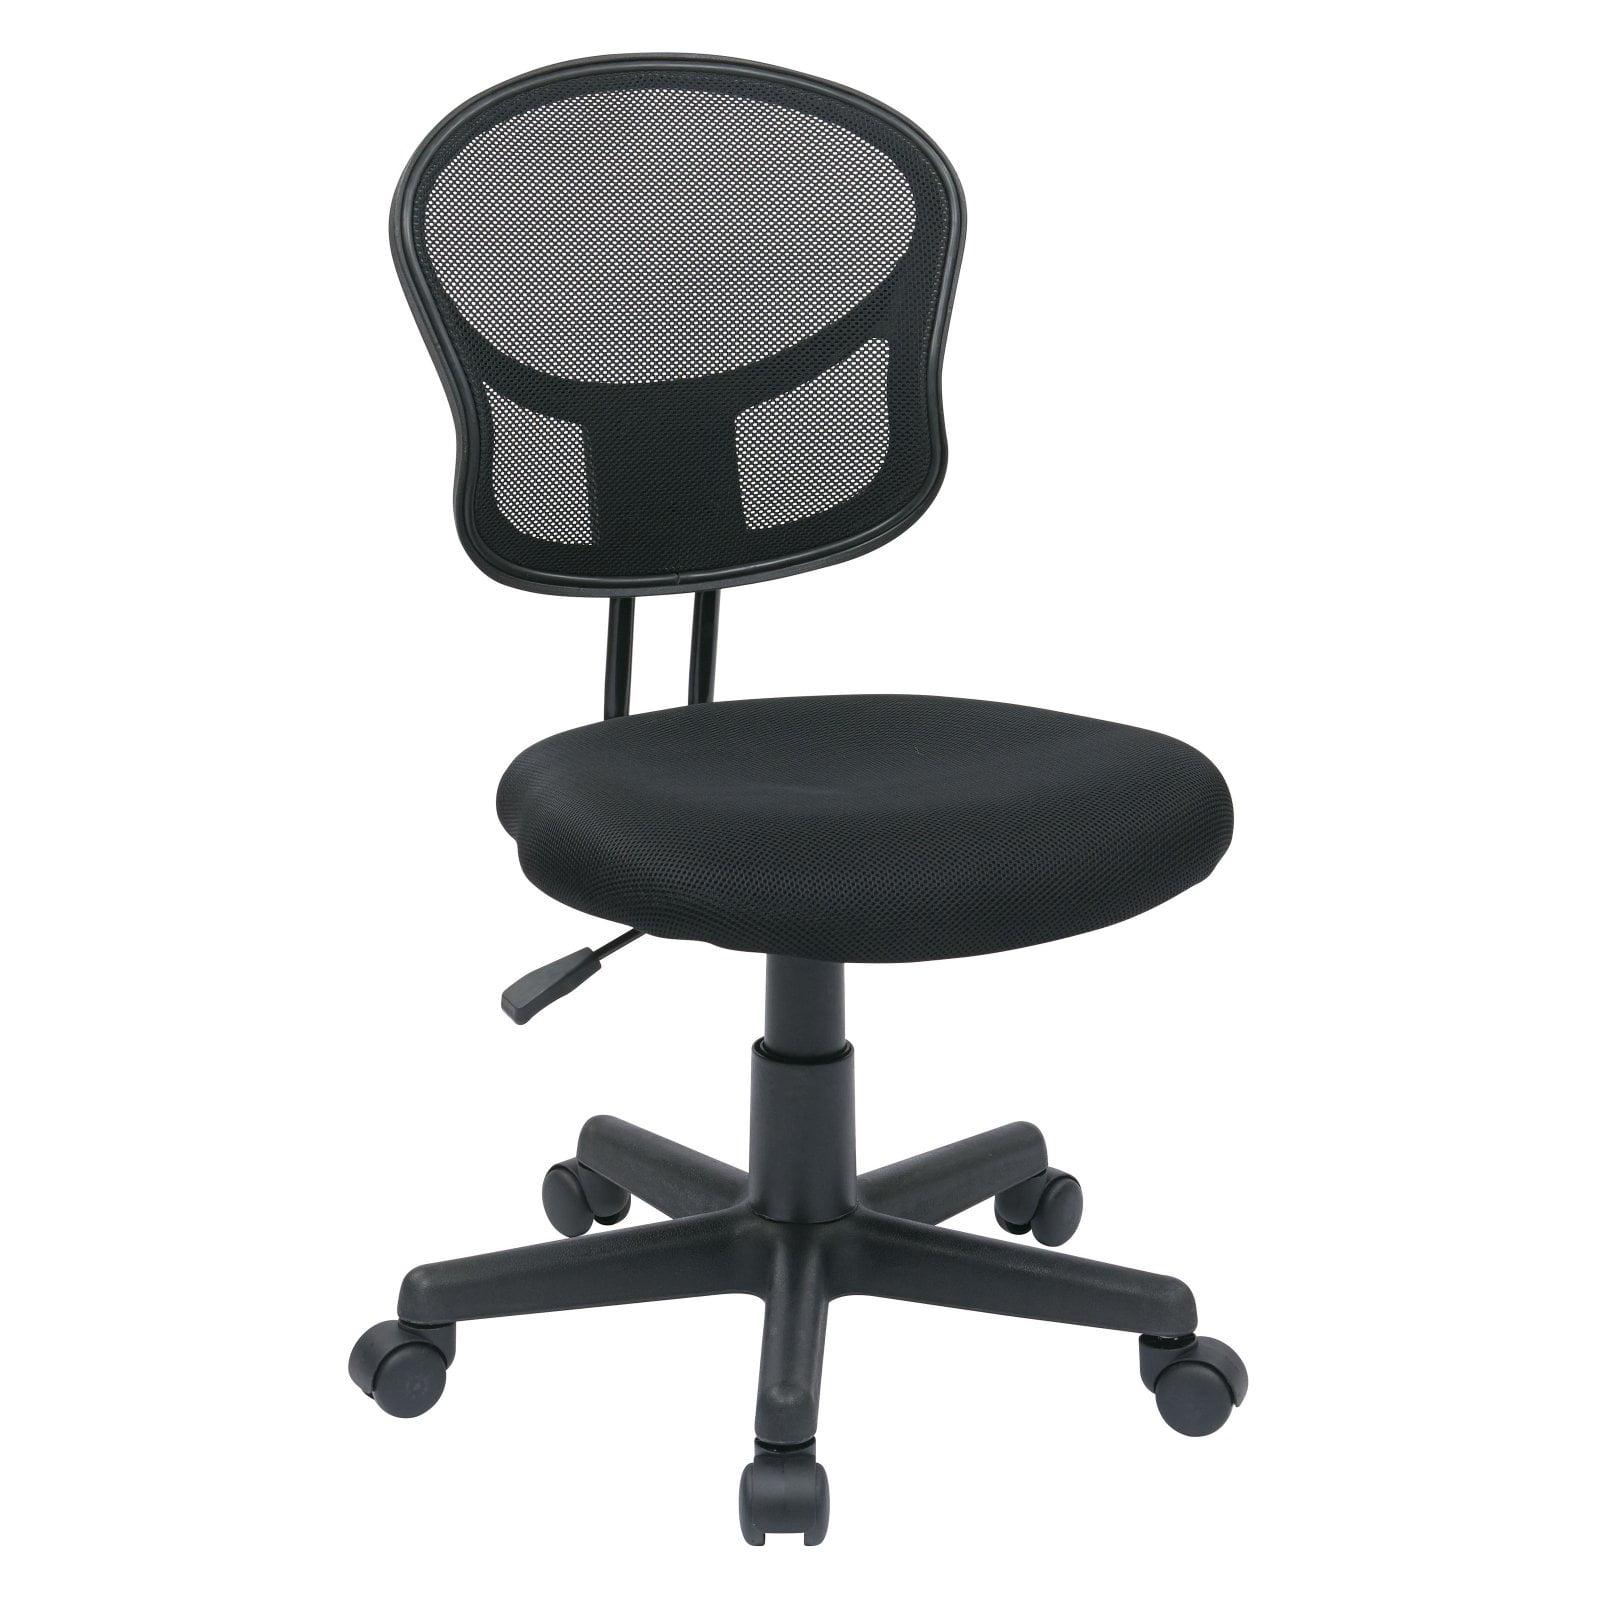 360 Swivel Armless Task Chair in Black Mesh with Wood Accents